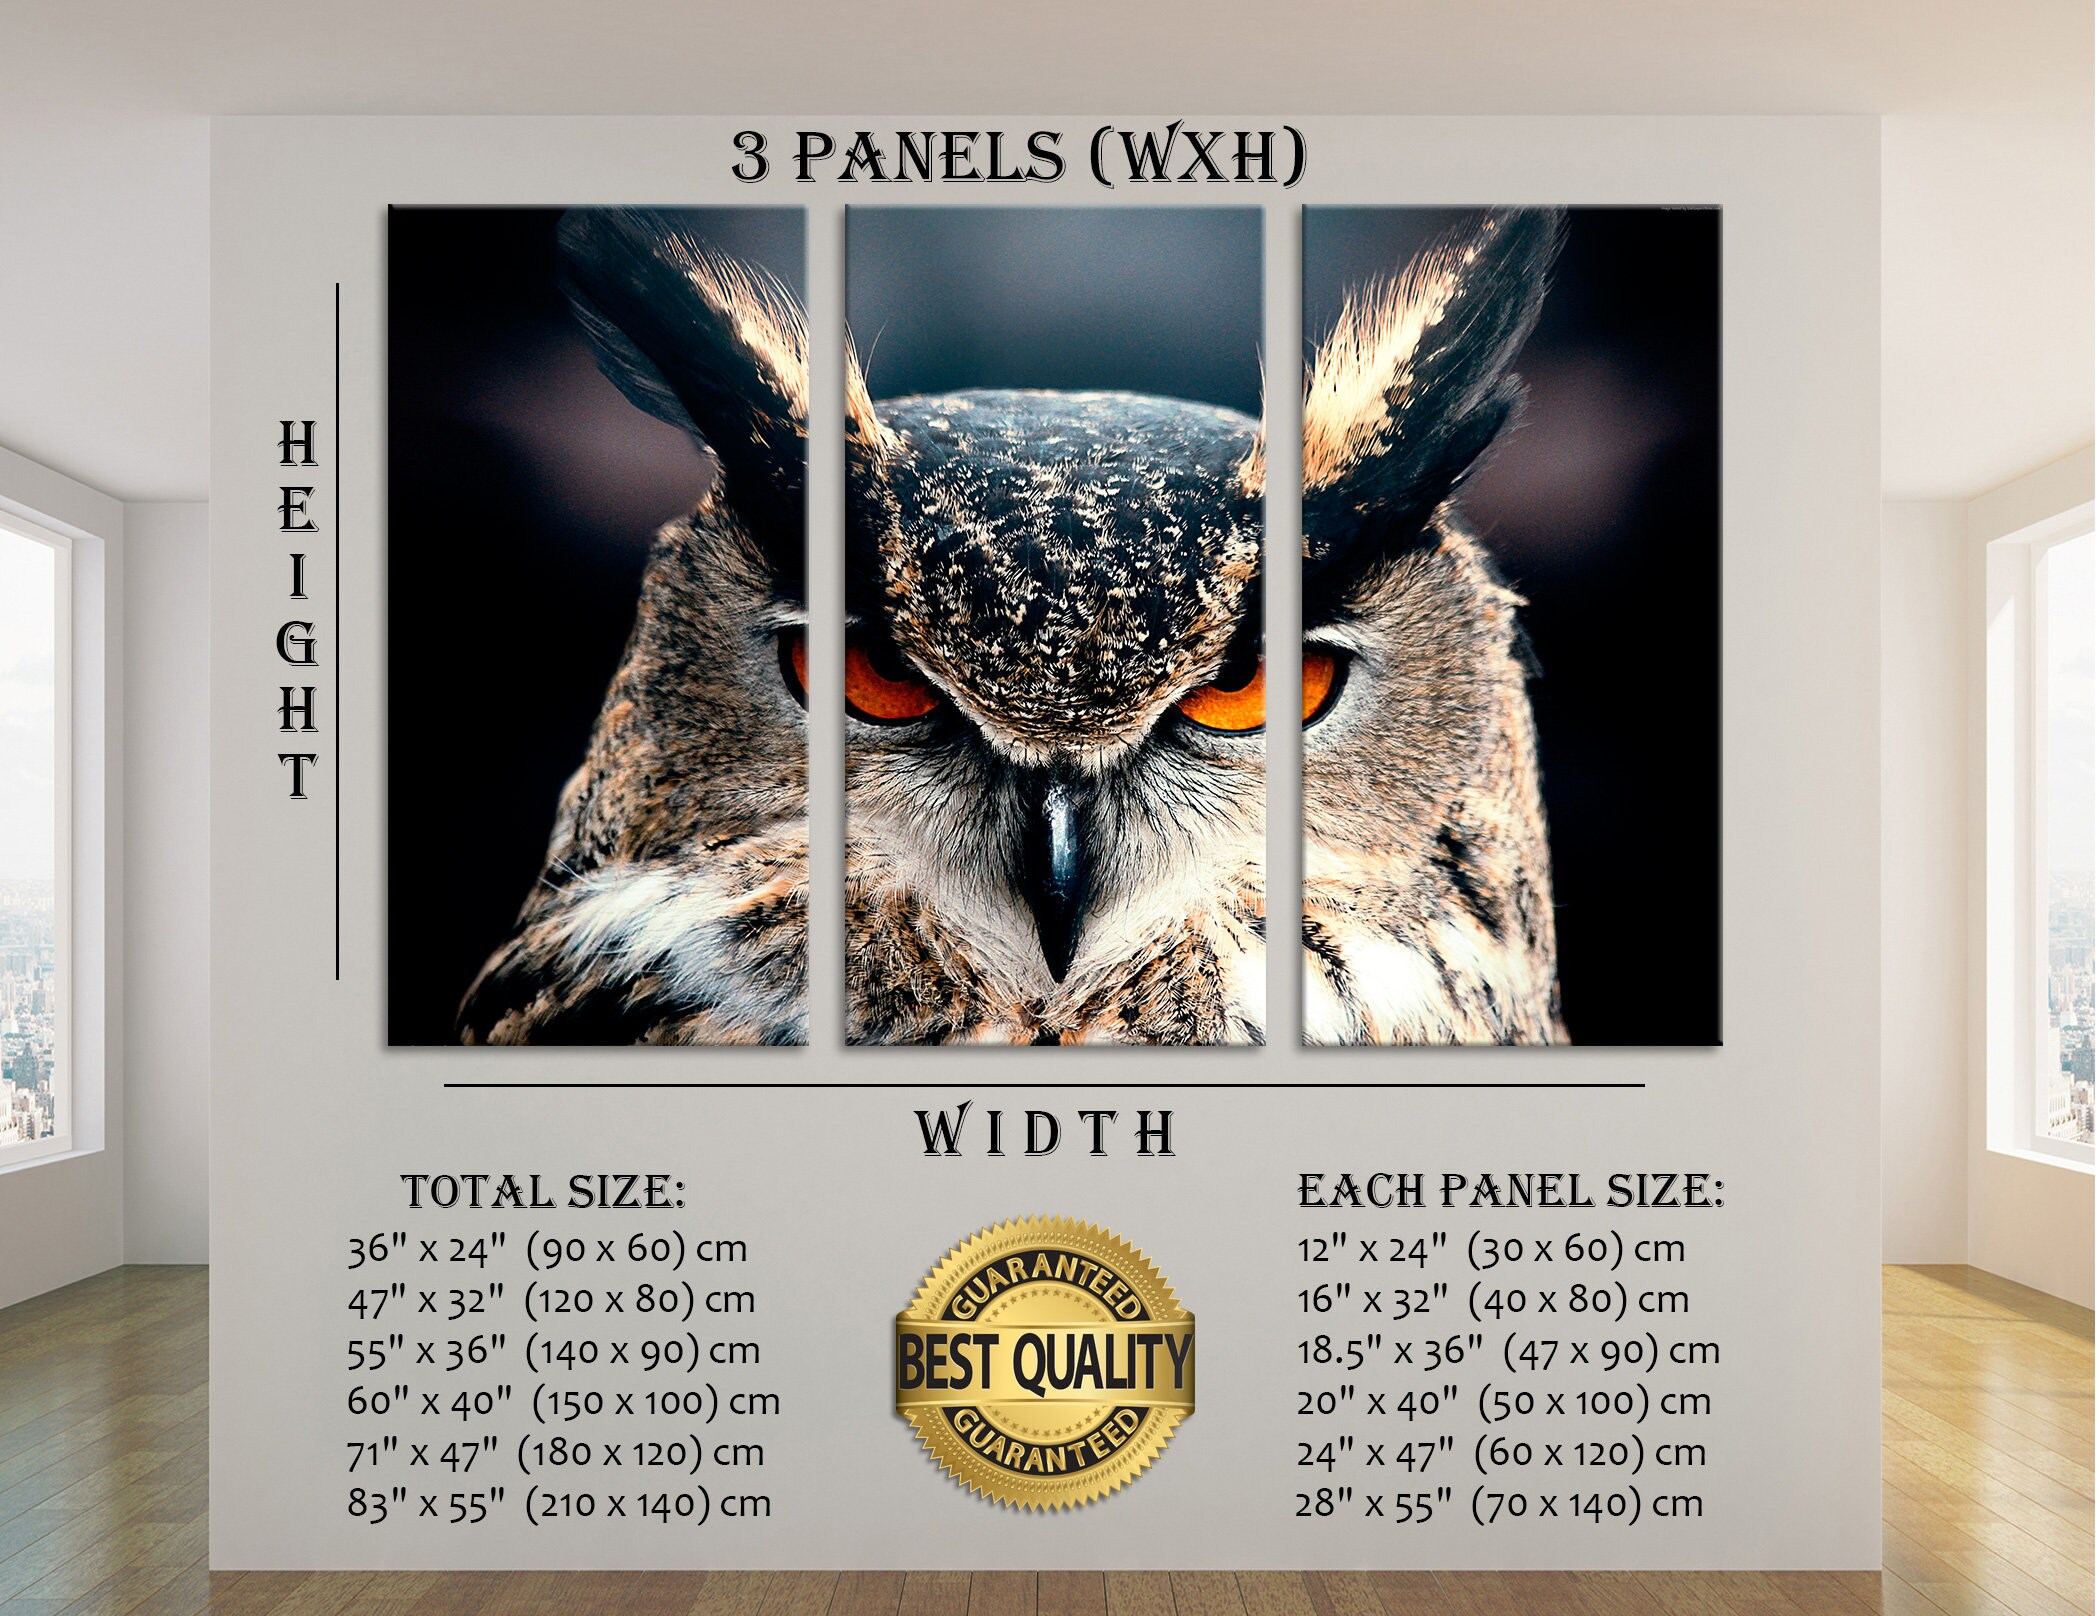 Mantel Gestaag Commotie Owl Wall Art Owl Wall Decor Owl Canvas Owl Poster Owl Prints - Etsy Finland